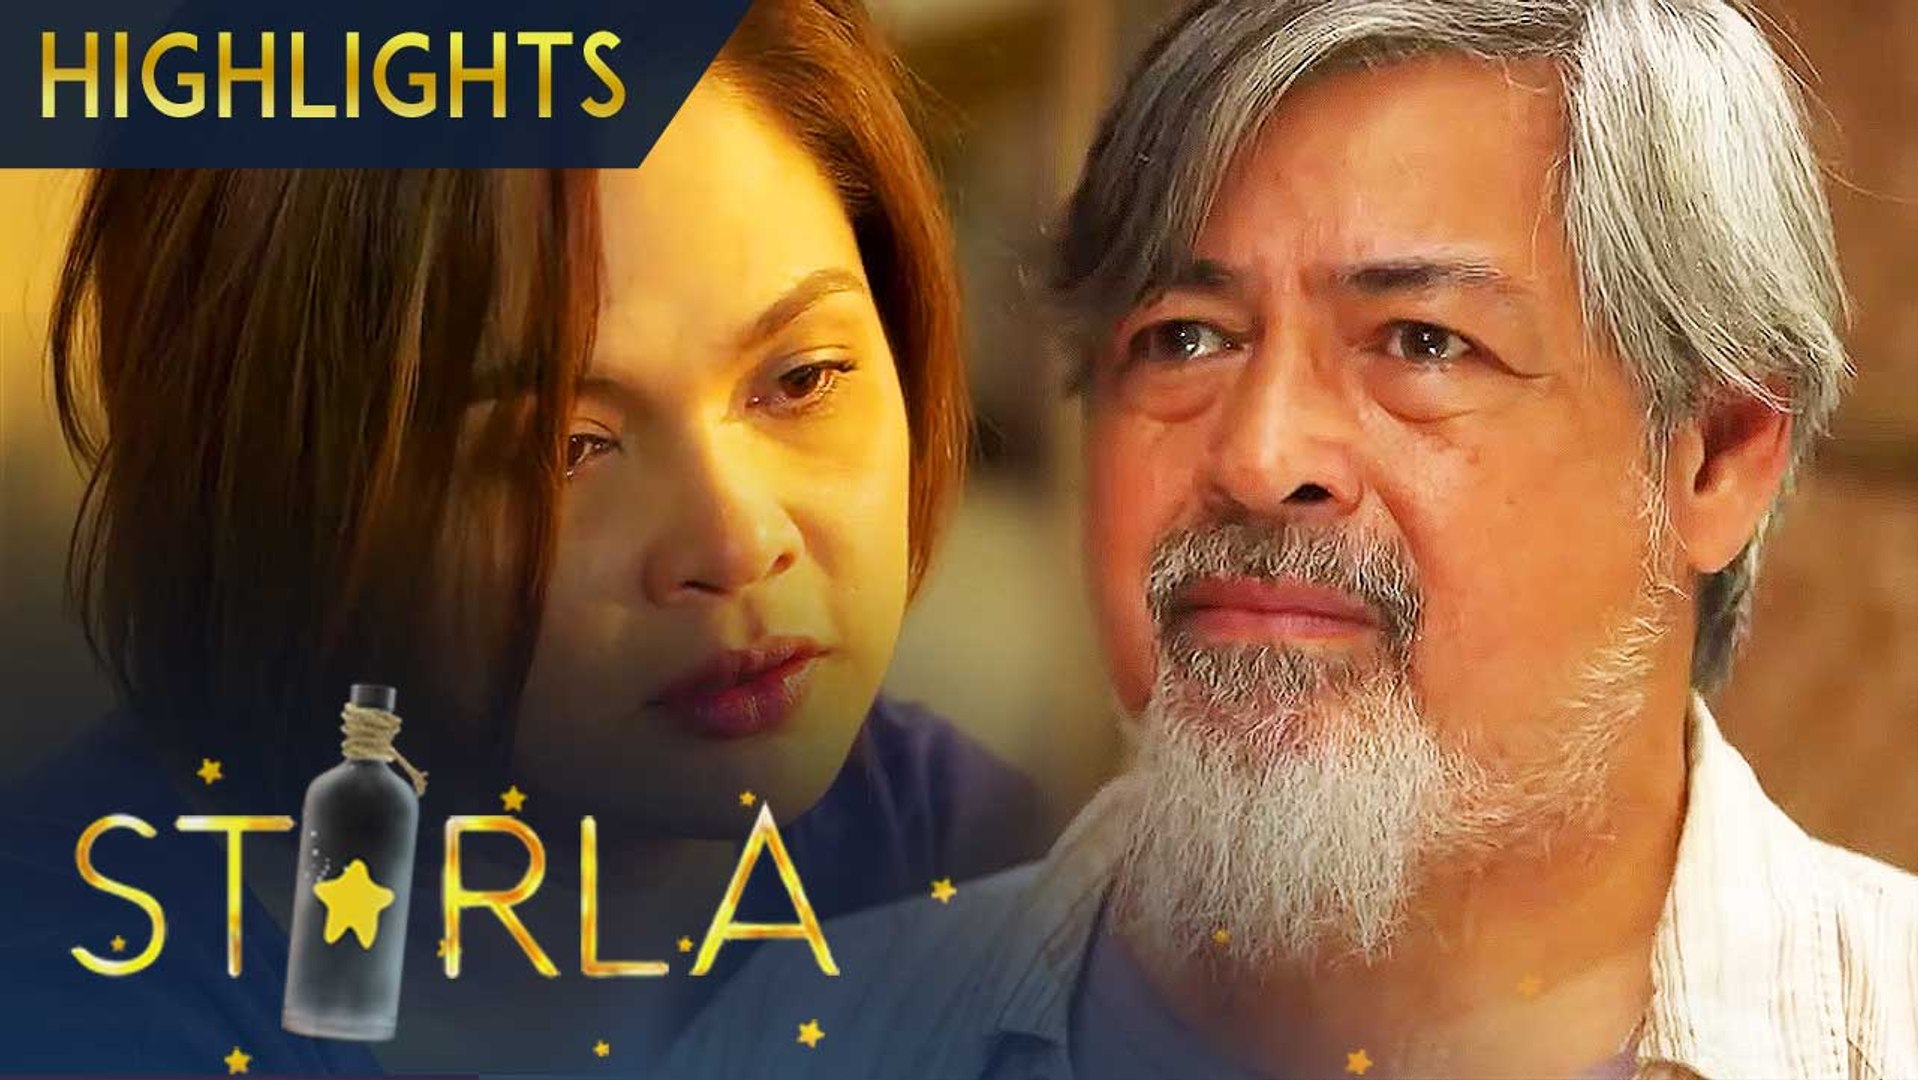 Mang Greggy plans to go after Teresa | Starla